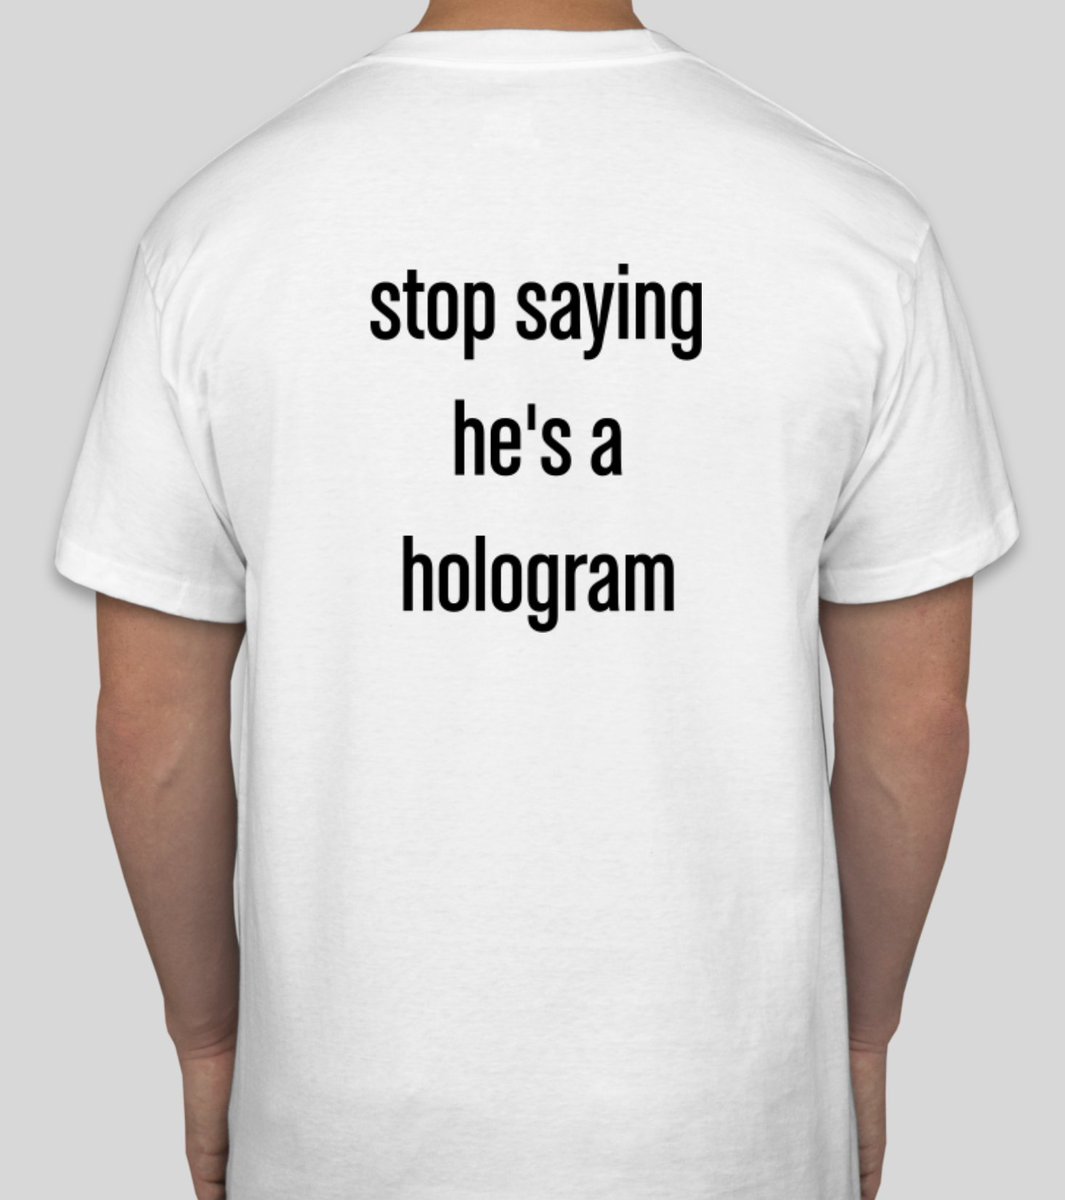 i made a shirt to deal with you losers